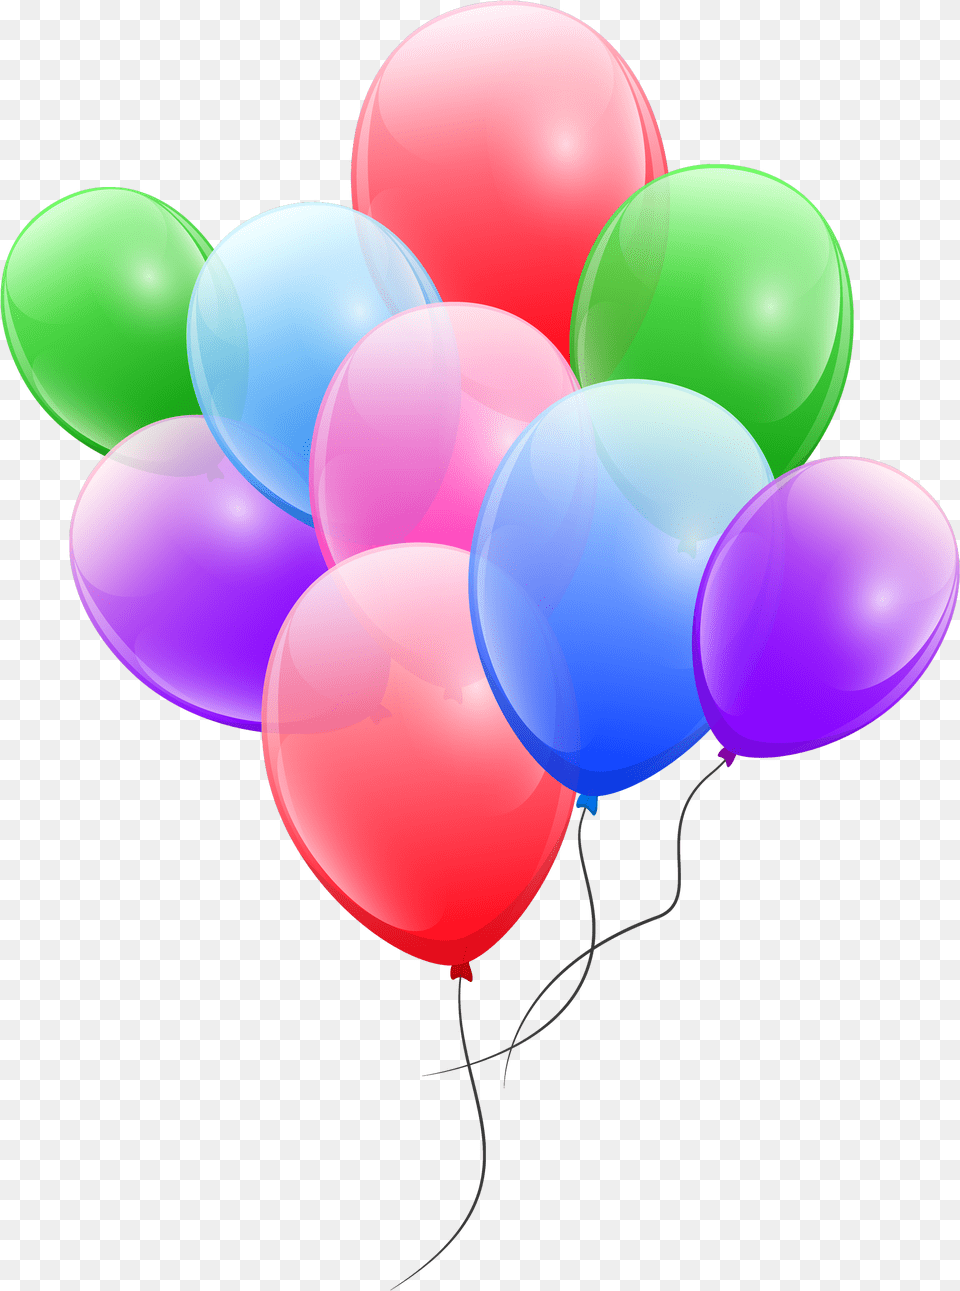 Colorful Balloons Image Pngpix Colorful Balloon Free Png Download